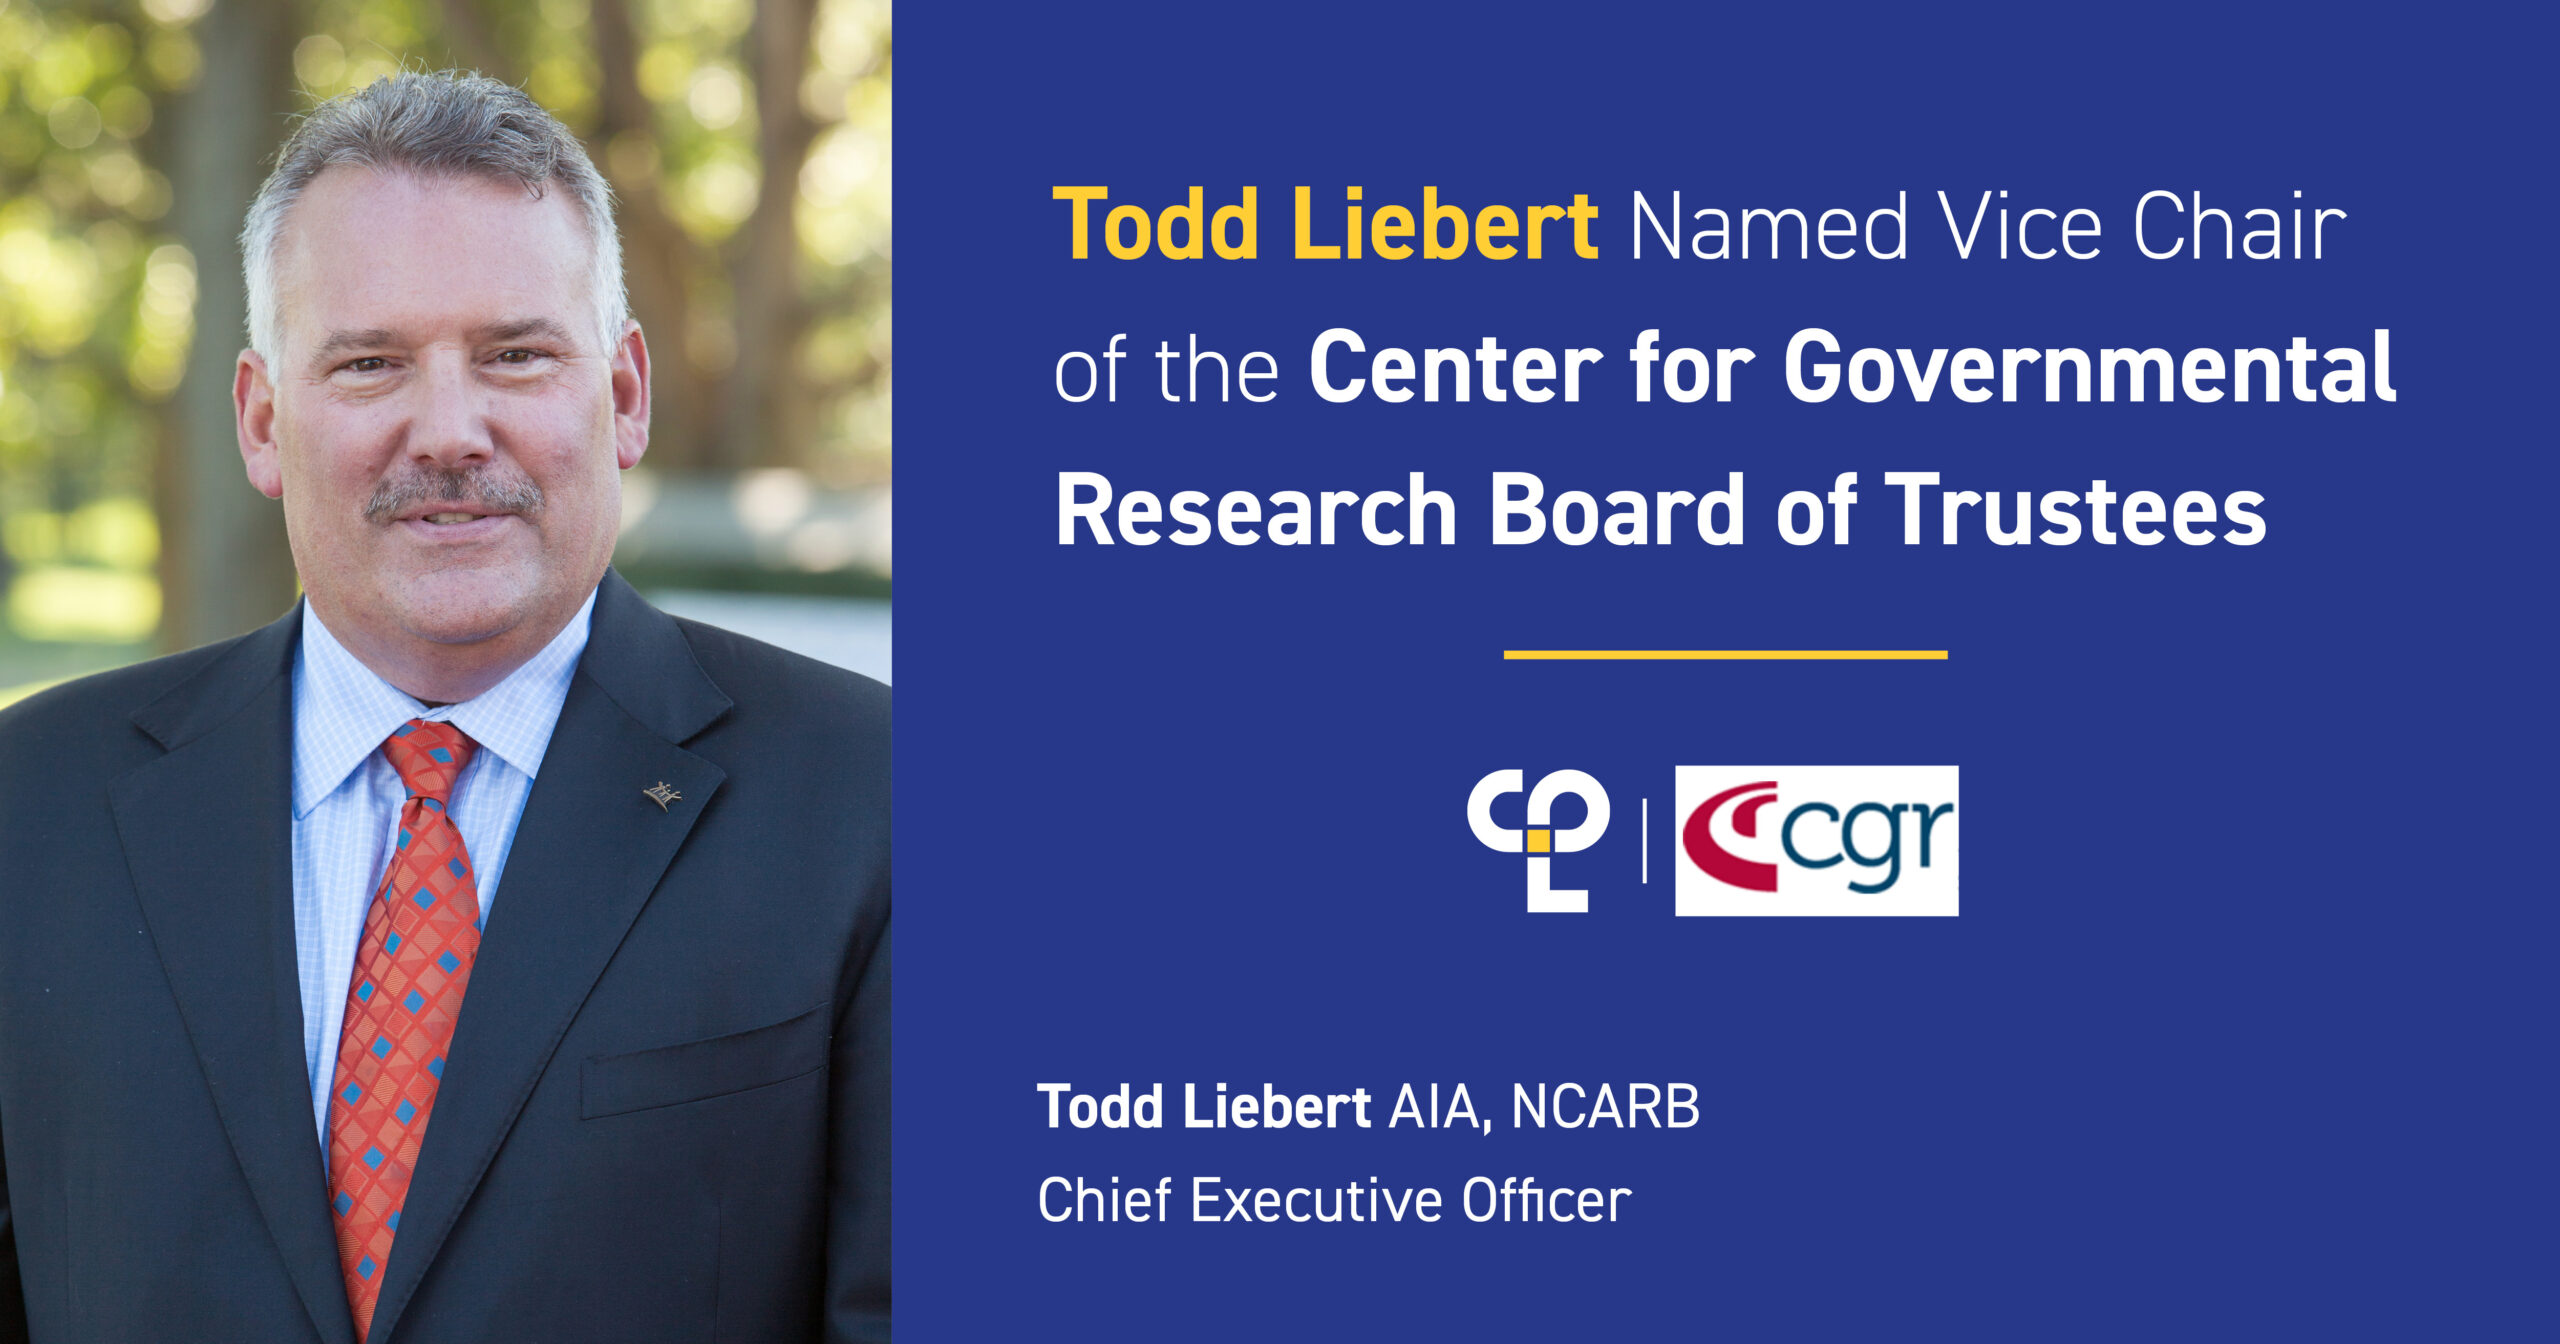 Image is a graphic with a photo of Todd Liebert, a smiling man wearing a blue suit with a red tie. On right it reads "Todd Liebert named Vice Chair of the Center for governmental Research Board of Trustees" Then a logo of CPL and the Center for Governmental Research shown side by side. At the bottom it reads "Todd Liebert AIA, NCARB Chief Executive Officer"